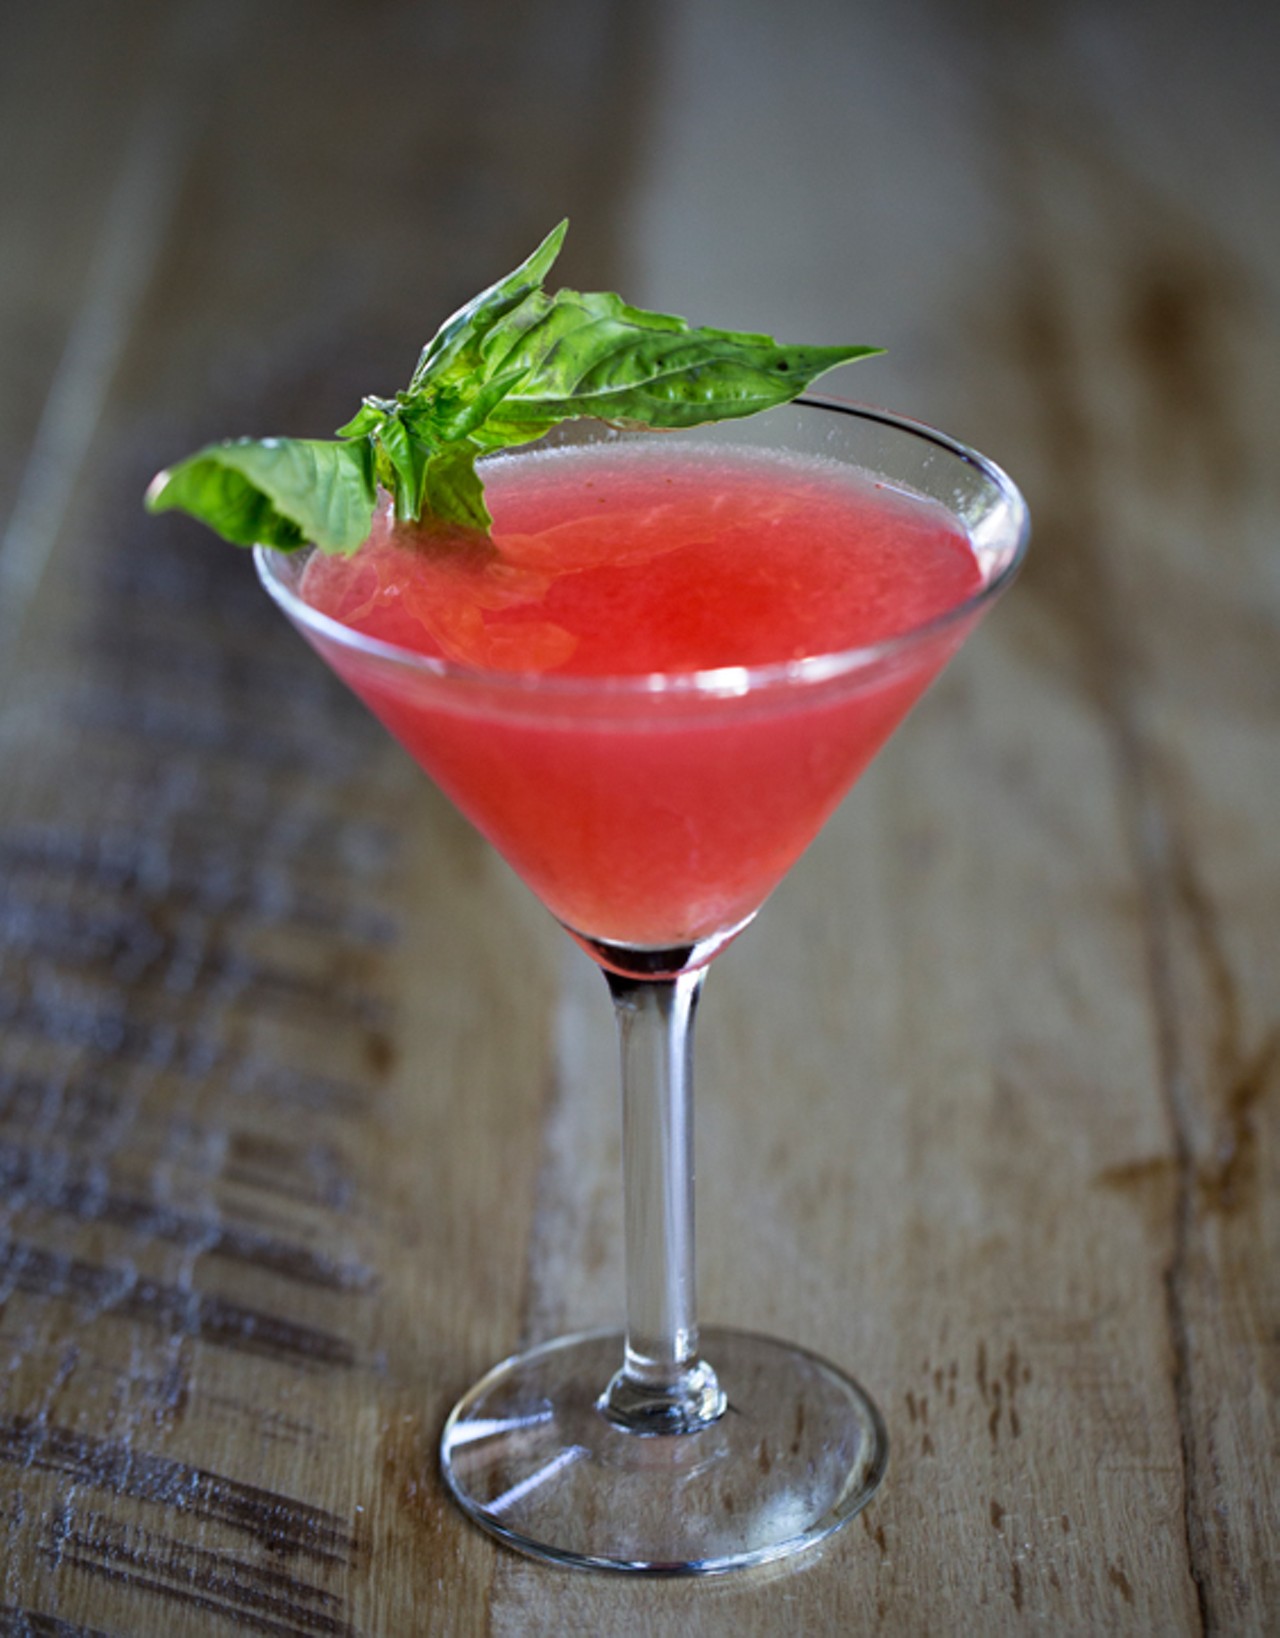 The "Rathbone" is strawberry-infused rum, simple syrup, lemon and basil.
Mike Shannon's&nbsp;dining room.